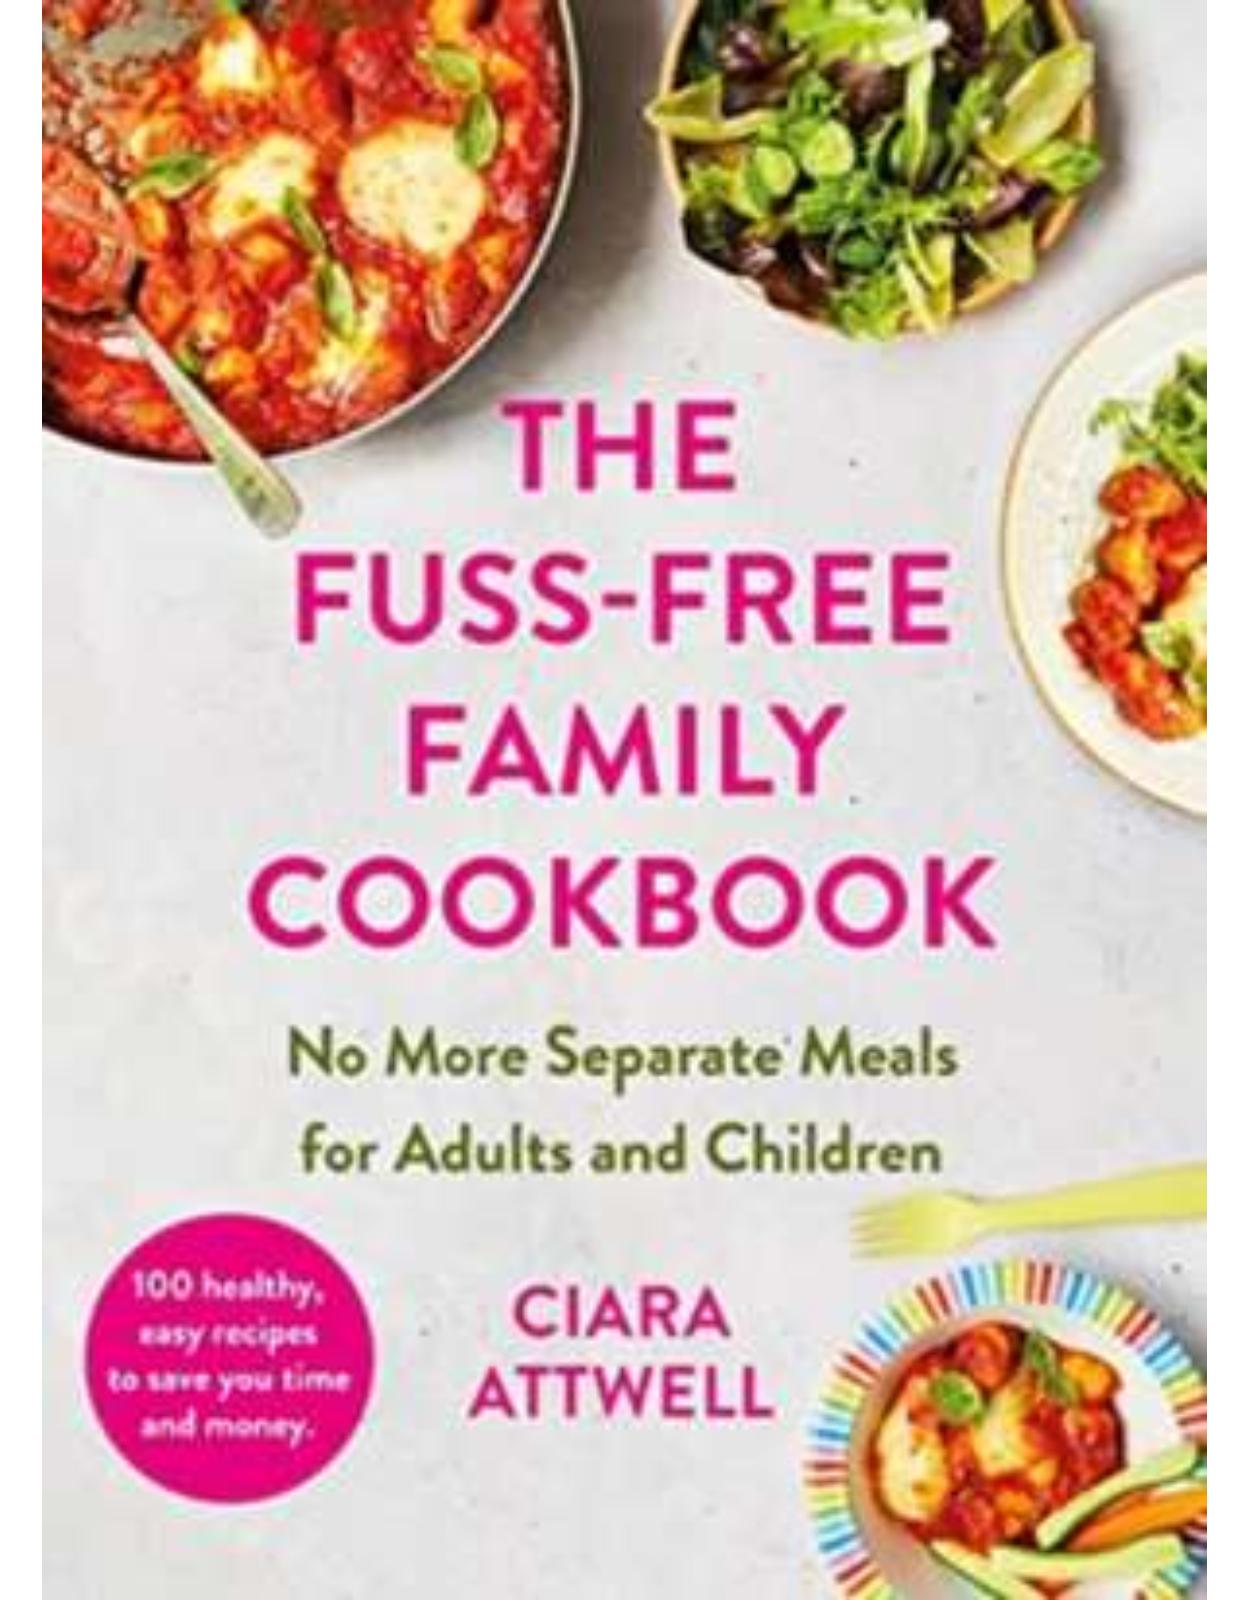 The Fuss-Free Family Cookbook